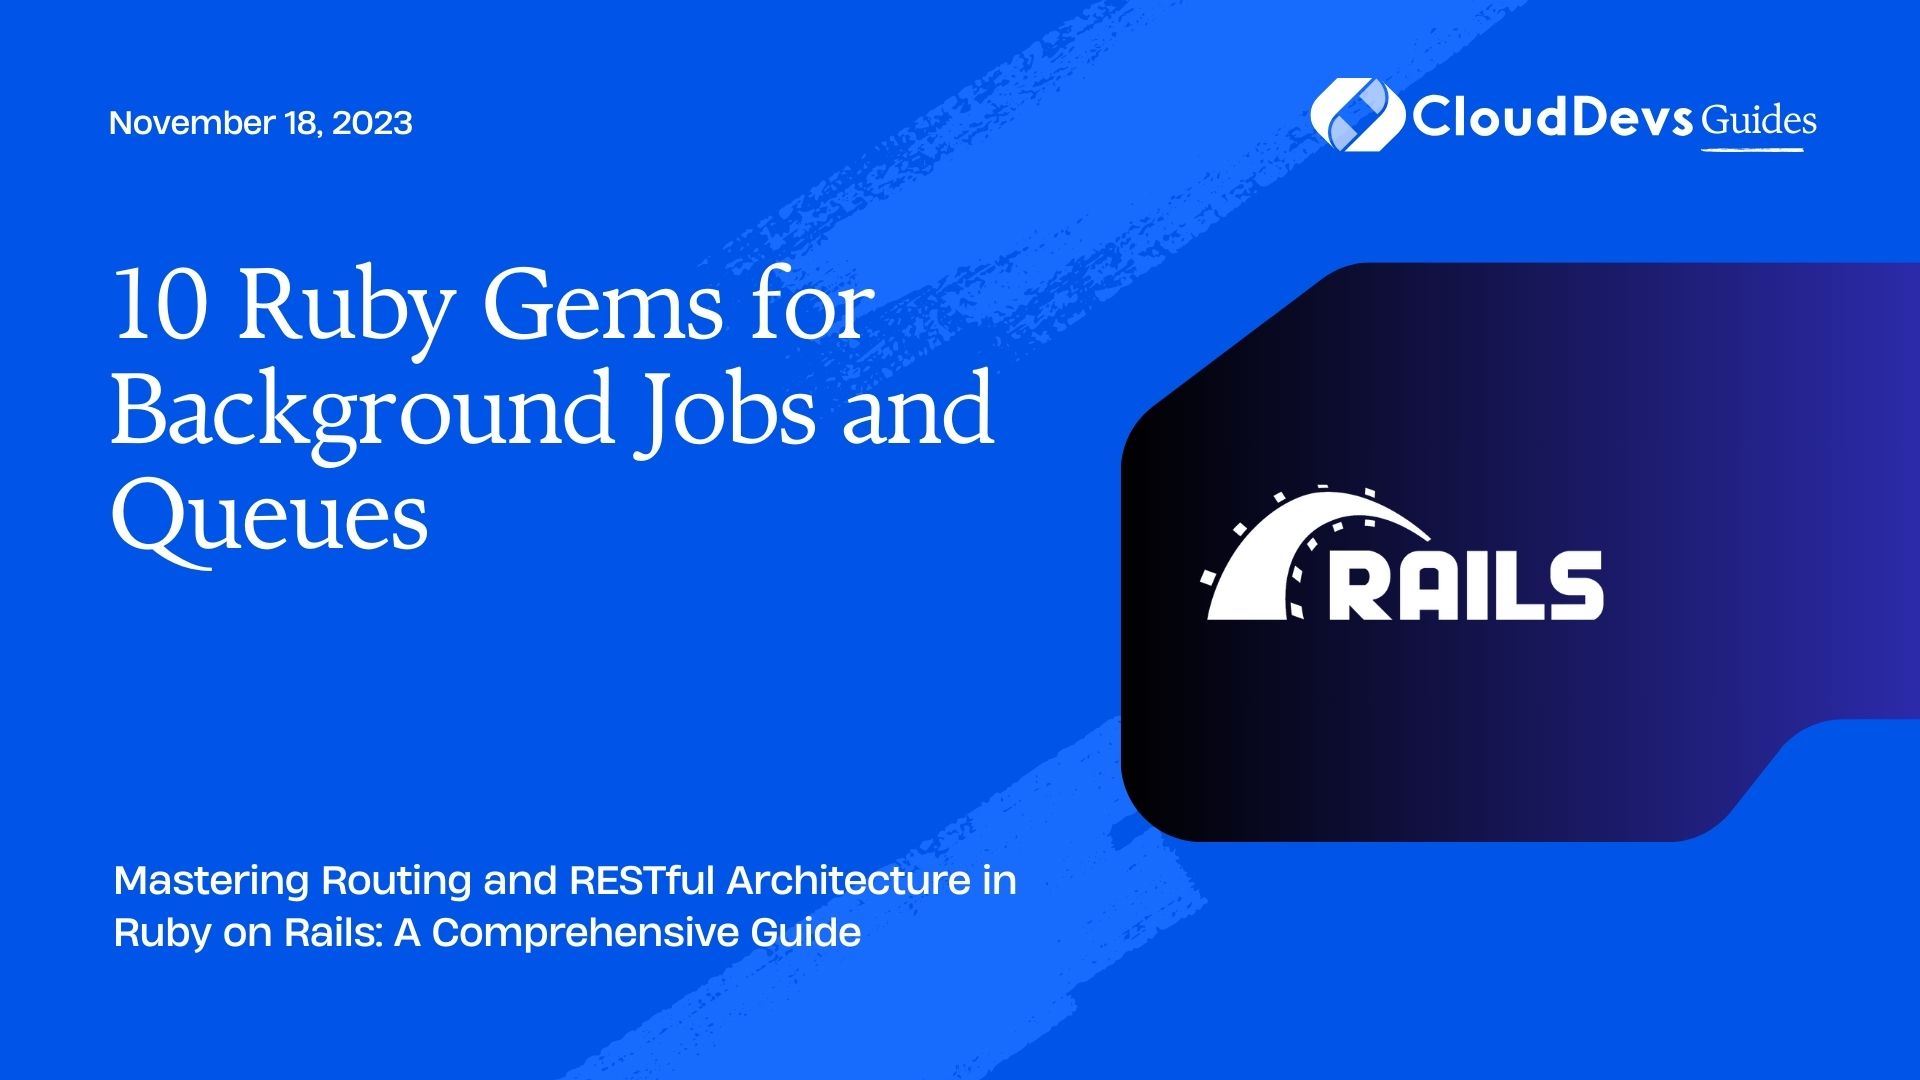 10 Ruby Gems for Background Jobs and Queues